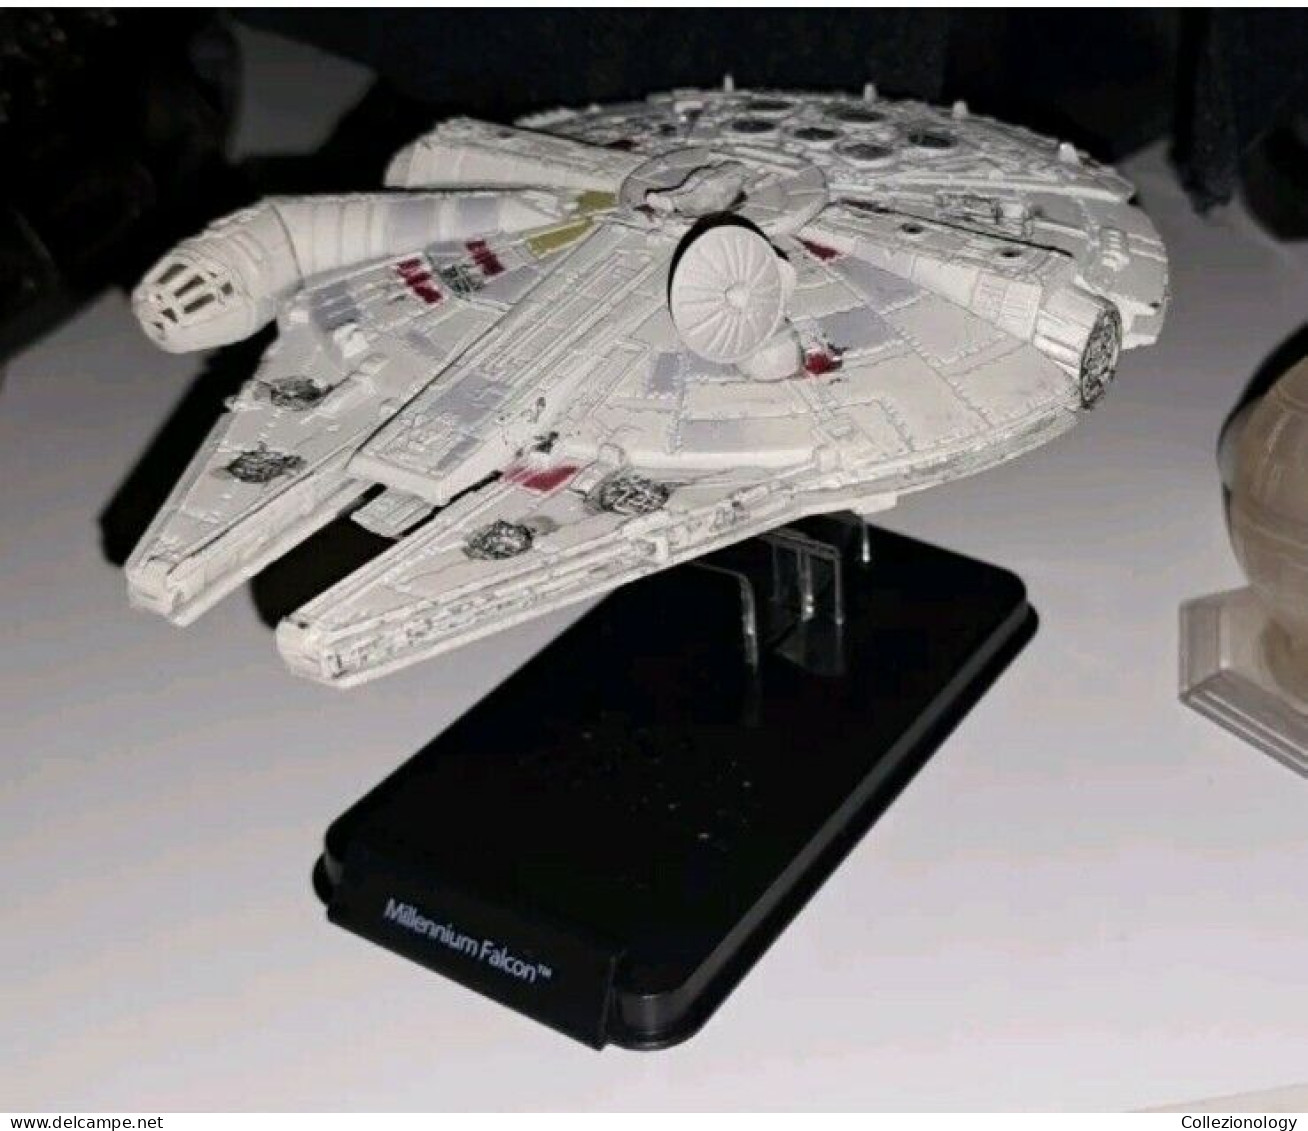 STAR WARS MILLENNIUM FALCON DIE CAST MODEL STARSHIPS & VEHICLES COLLECTION - First Release (1977-1985)